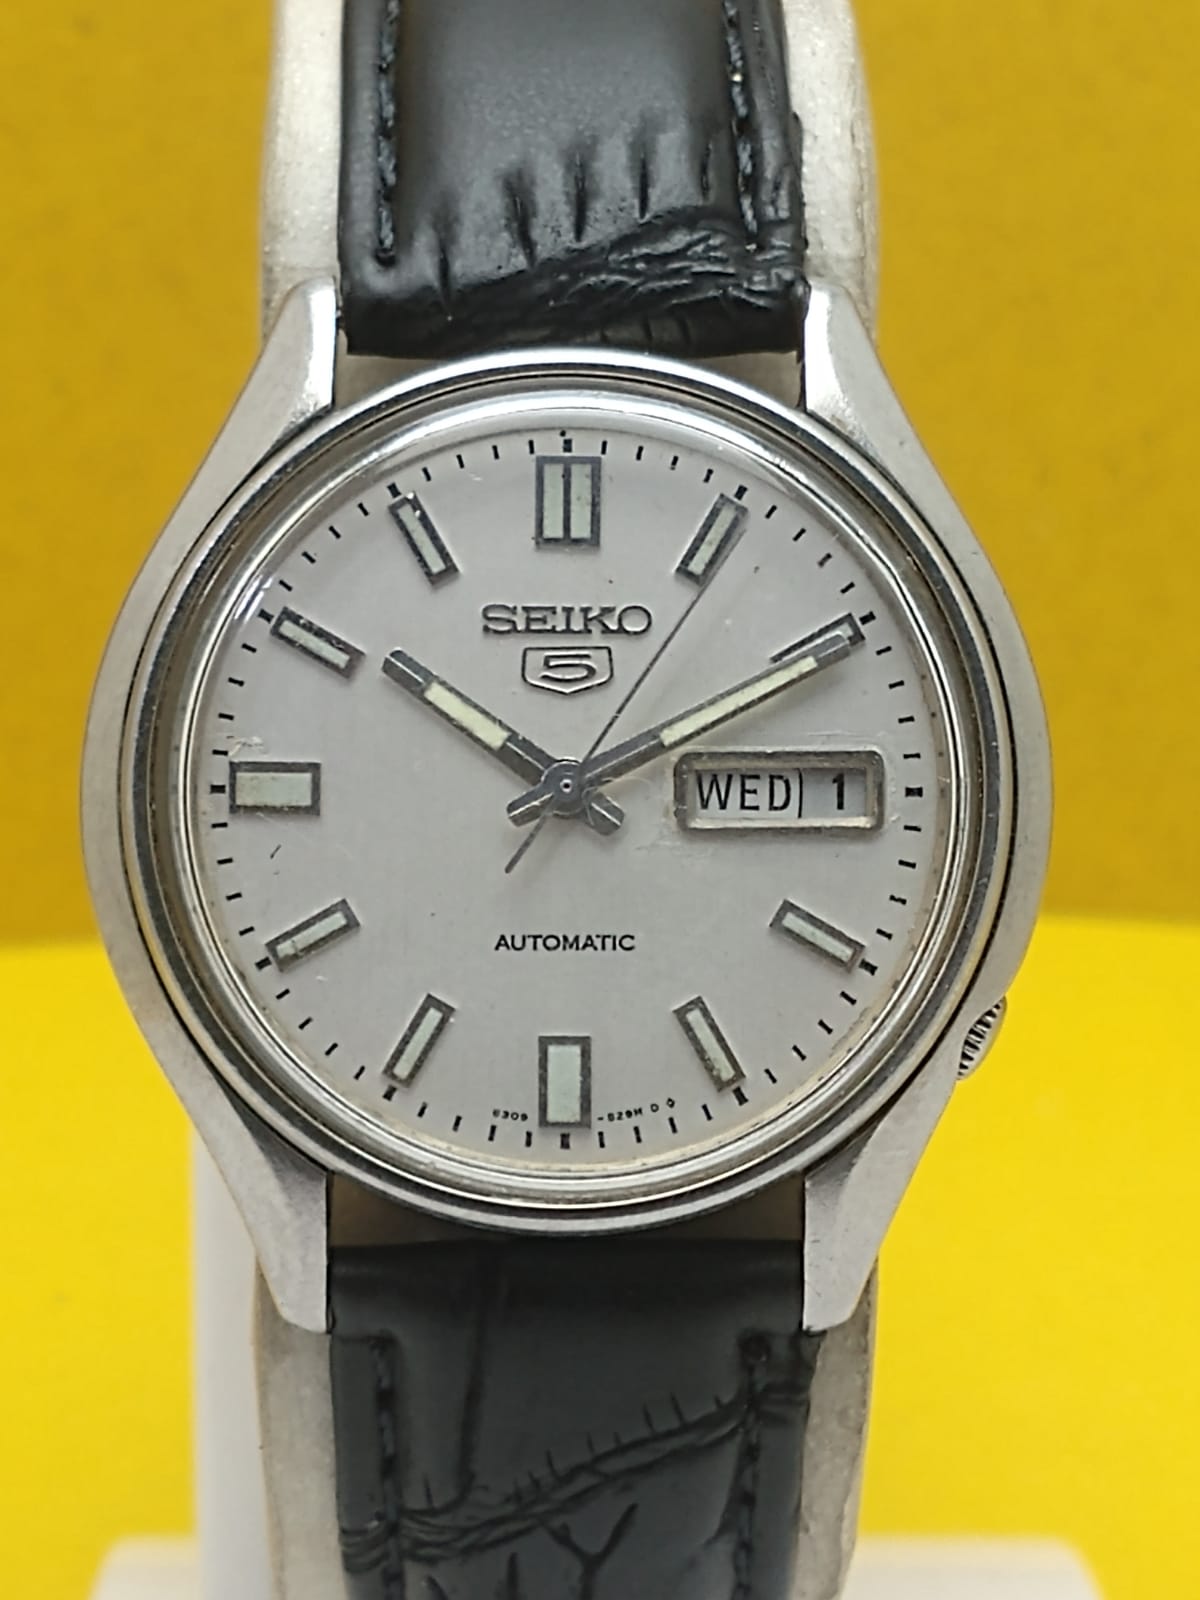 Seiko 5 Automatic 6309-8230 Day/Date Vintage Men’s Watch BRG108MJ1 ...